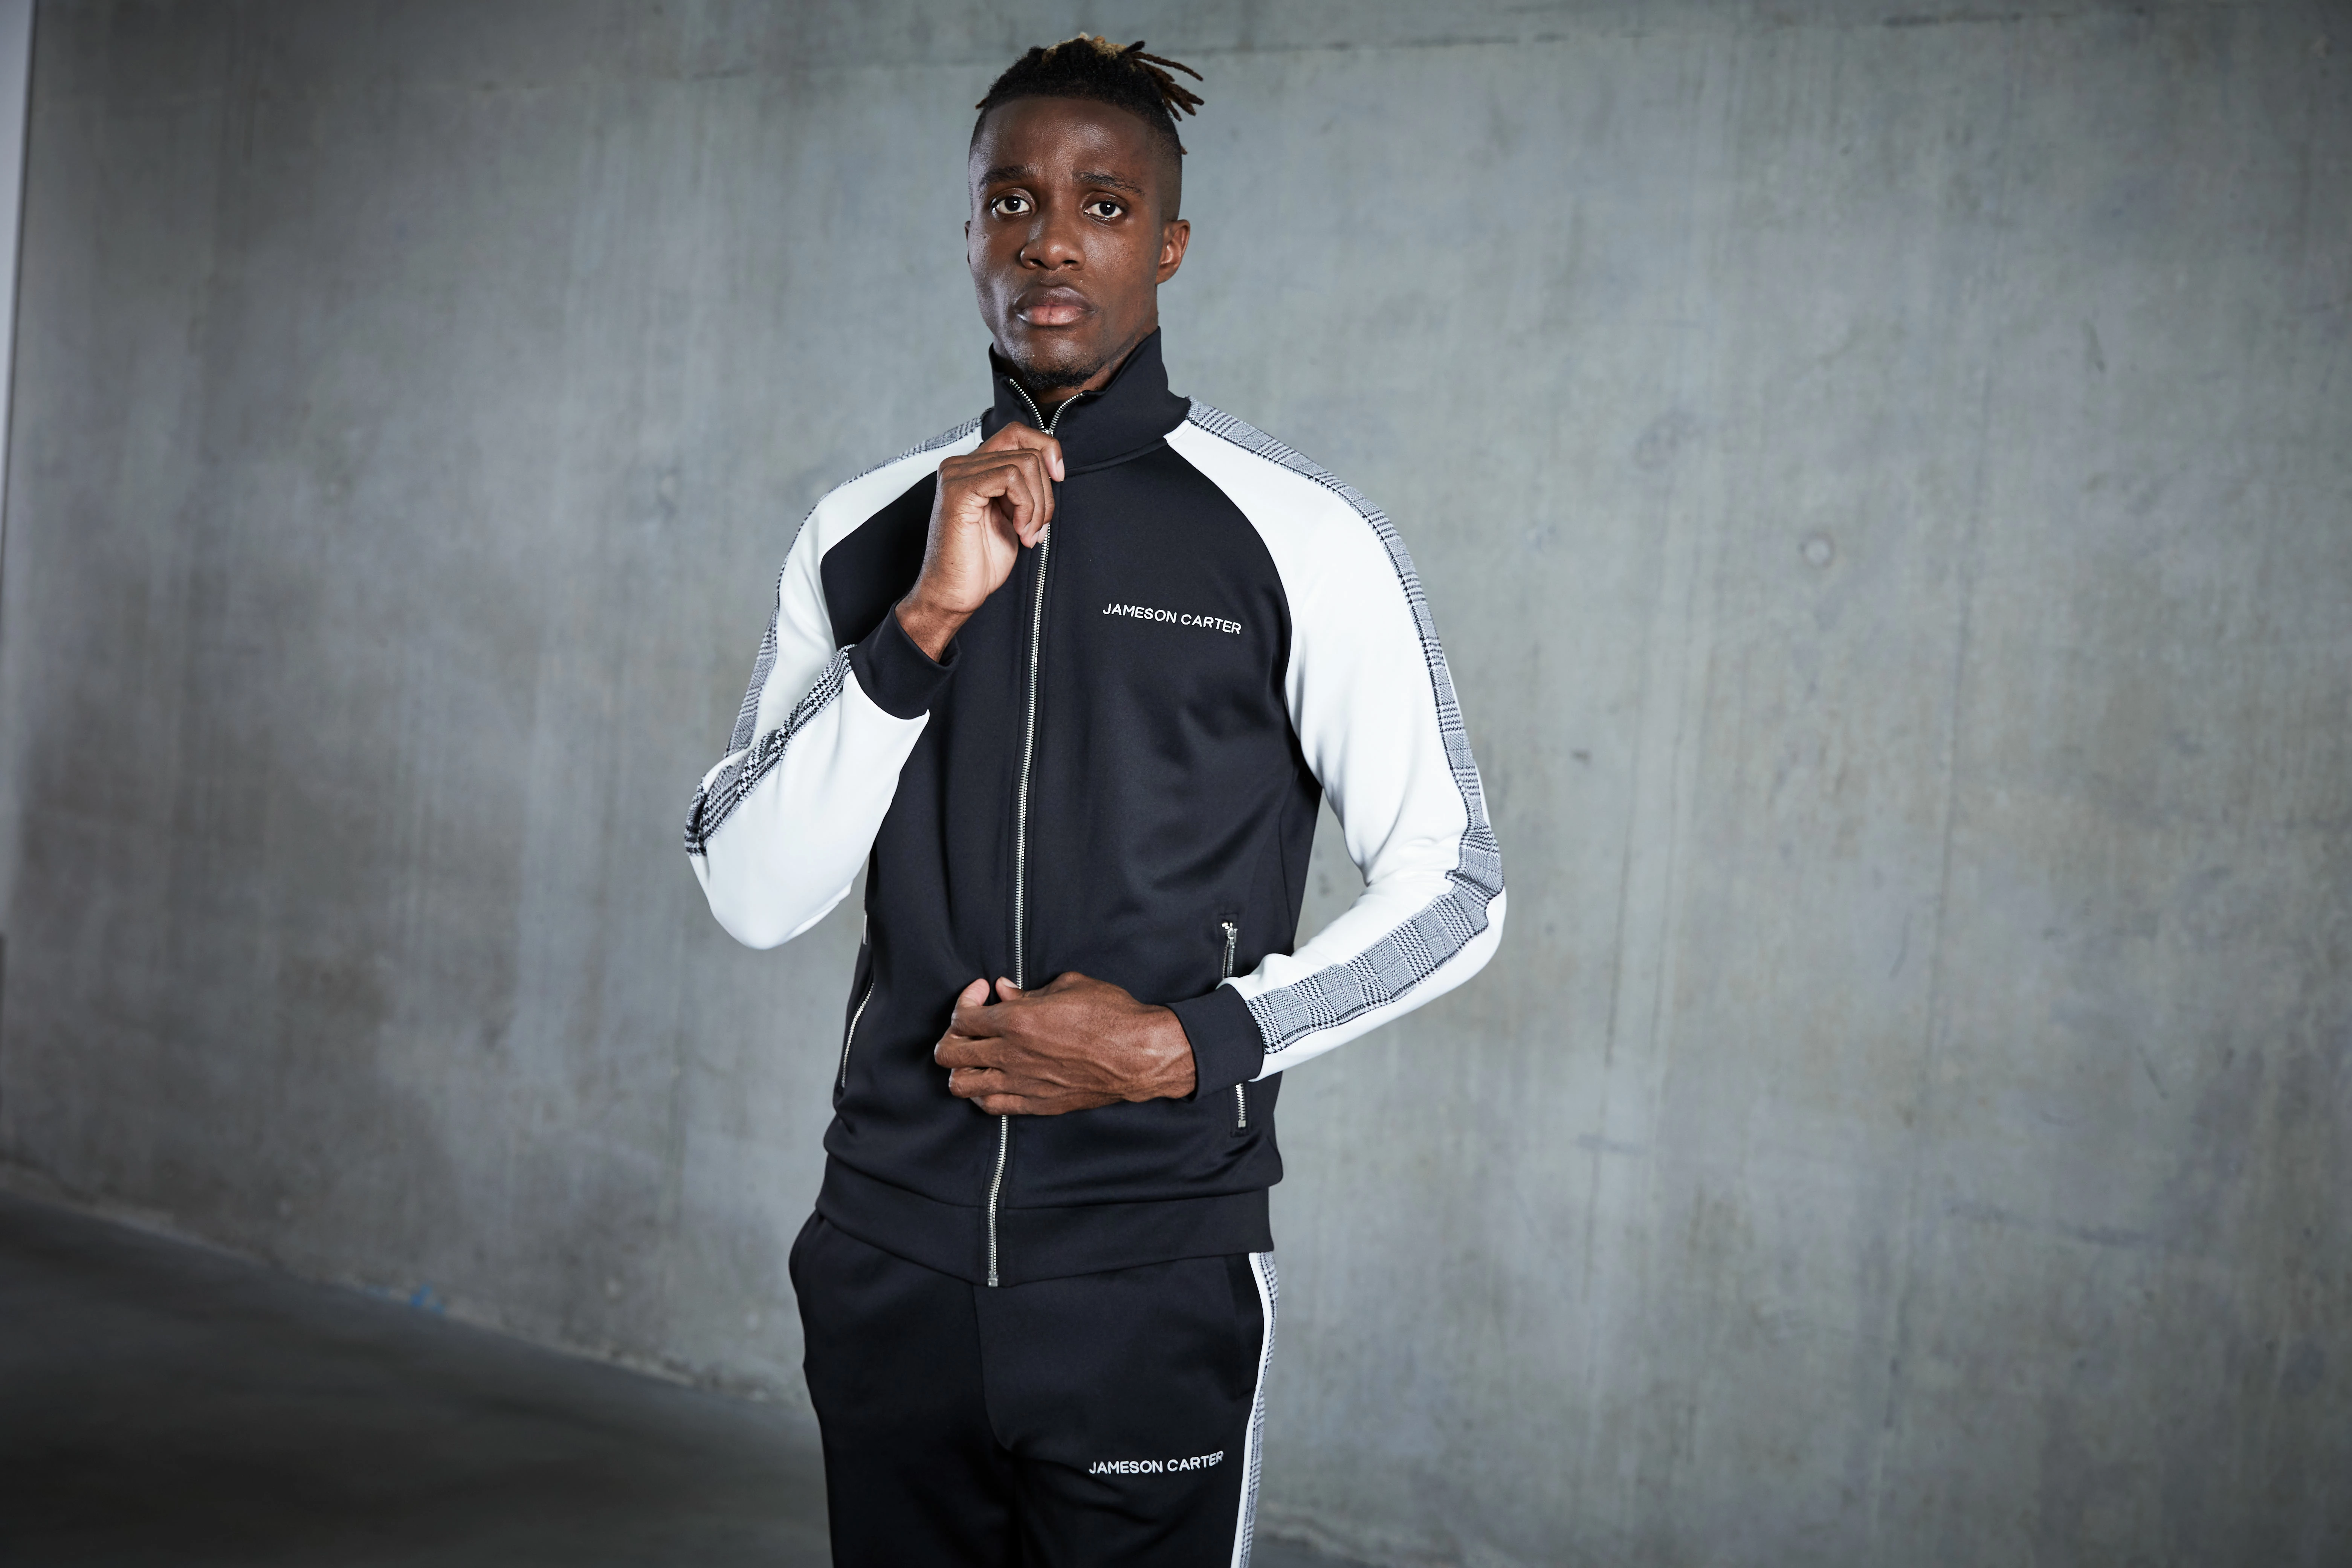 Crystal Palace footballer Wilfried Zaha modelling a tracksuit from his 'Wilfried Zaha x Jameson Carter' collection